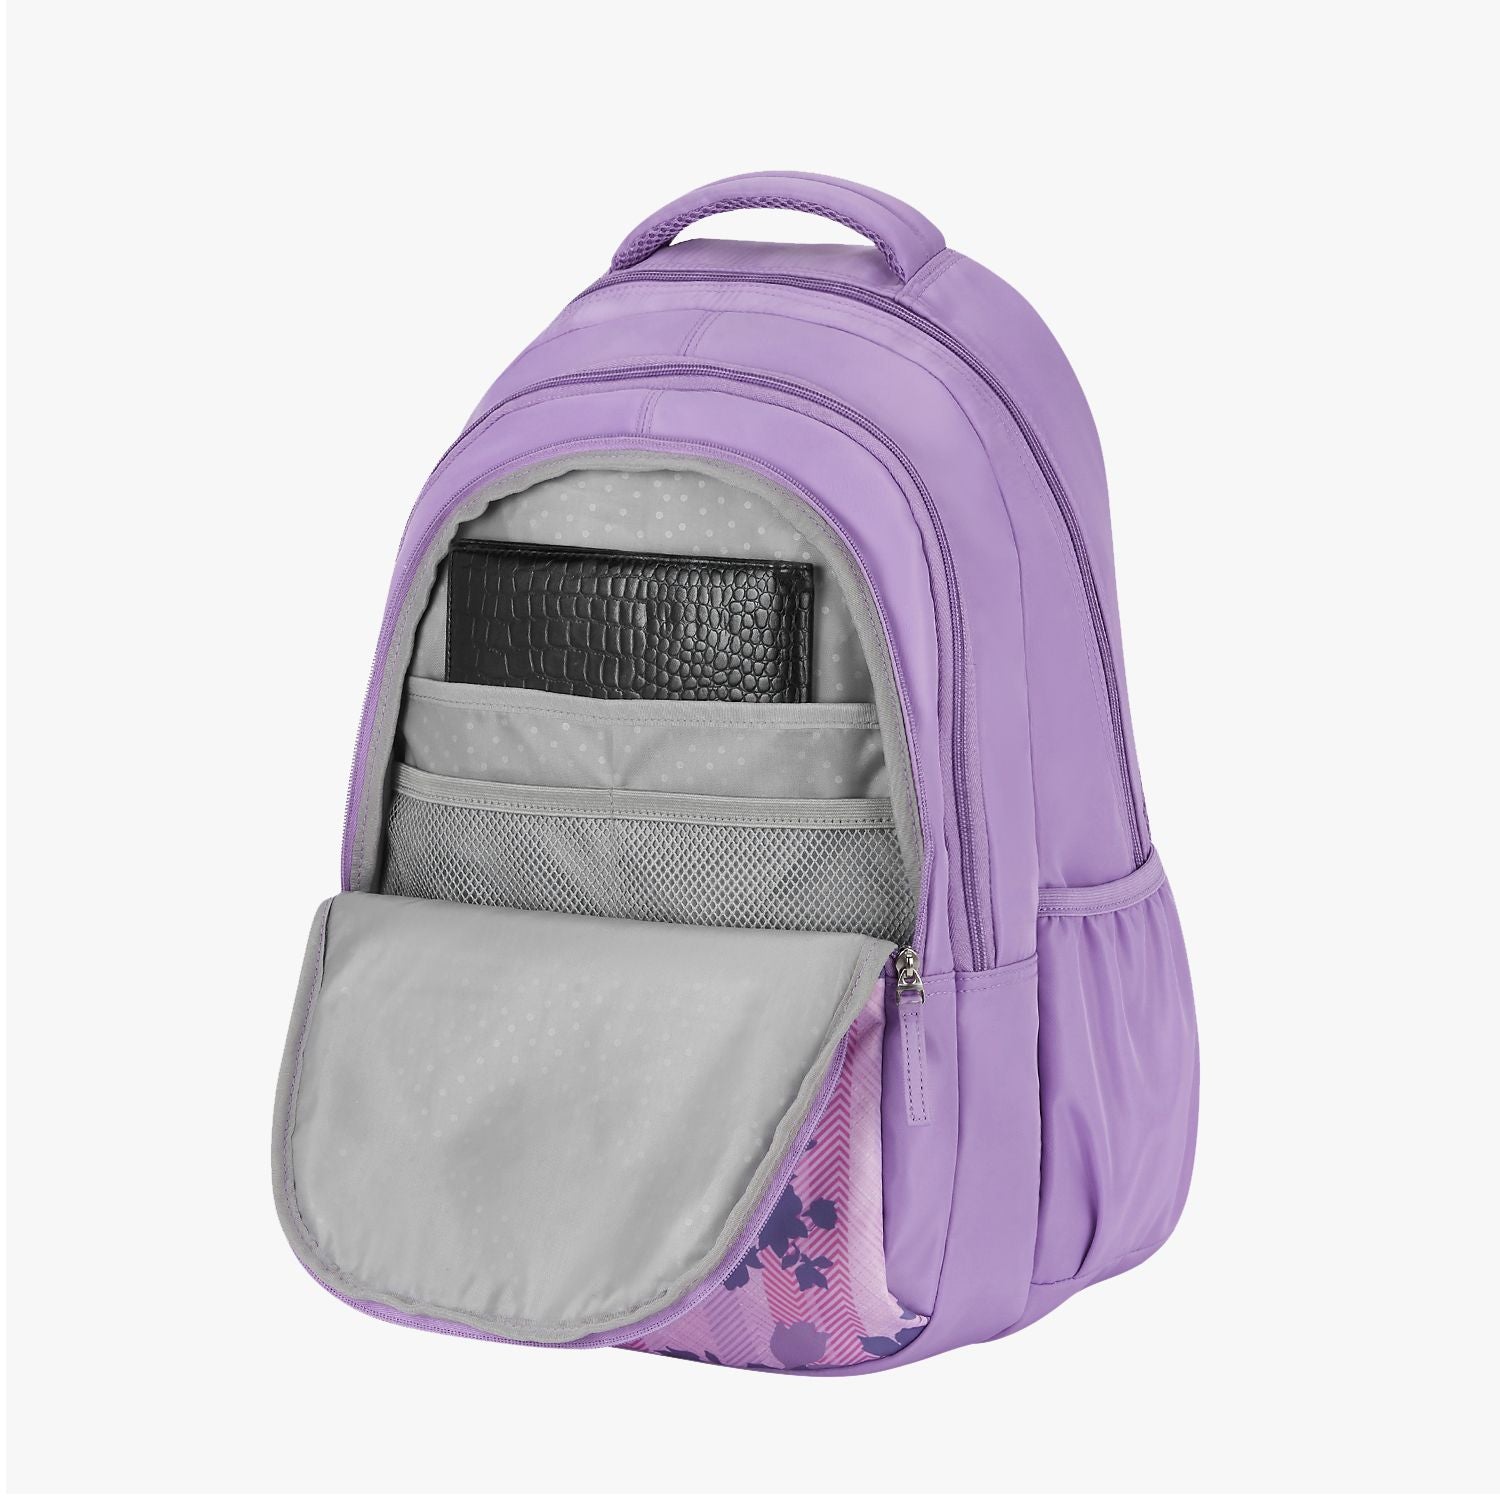 Genie Quinn 36L Purple Laptop Backpack With Laptop Sleeve